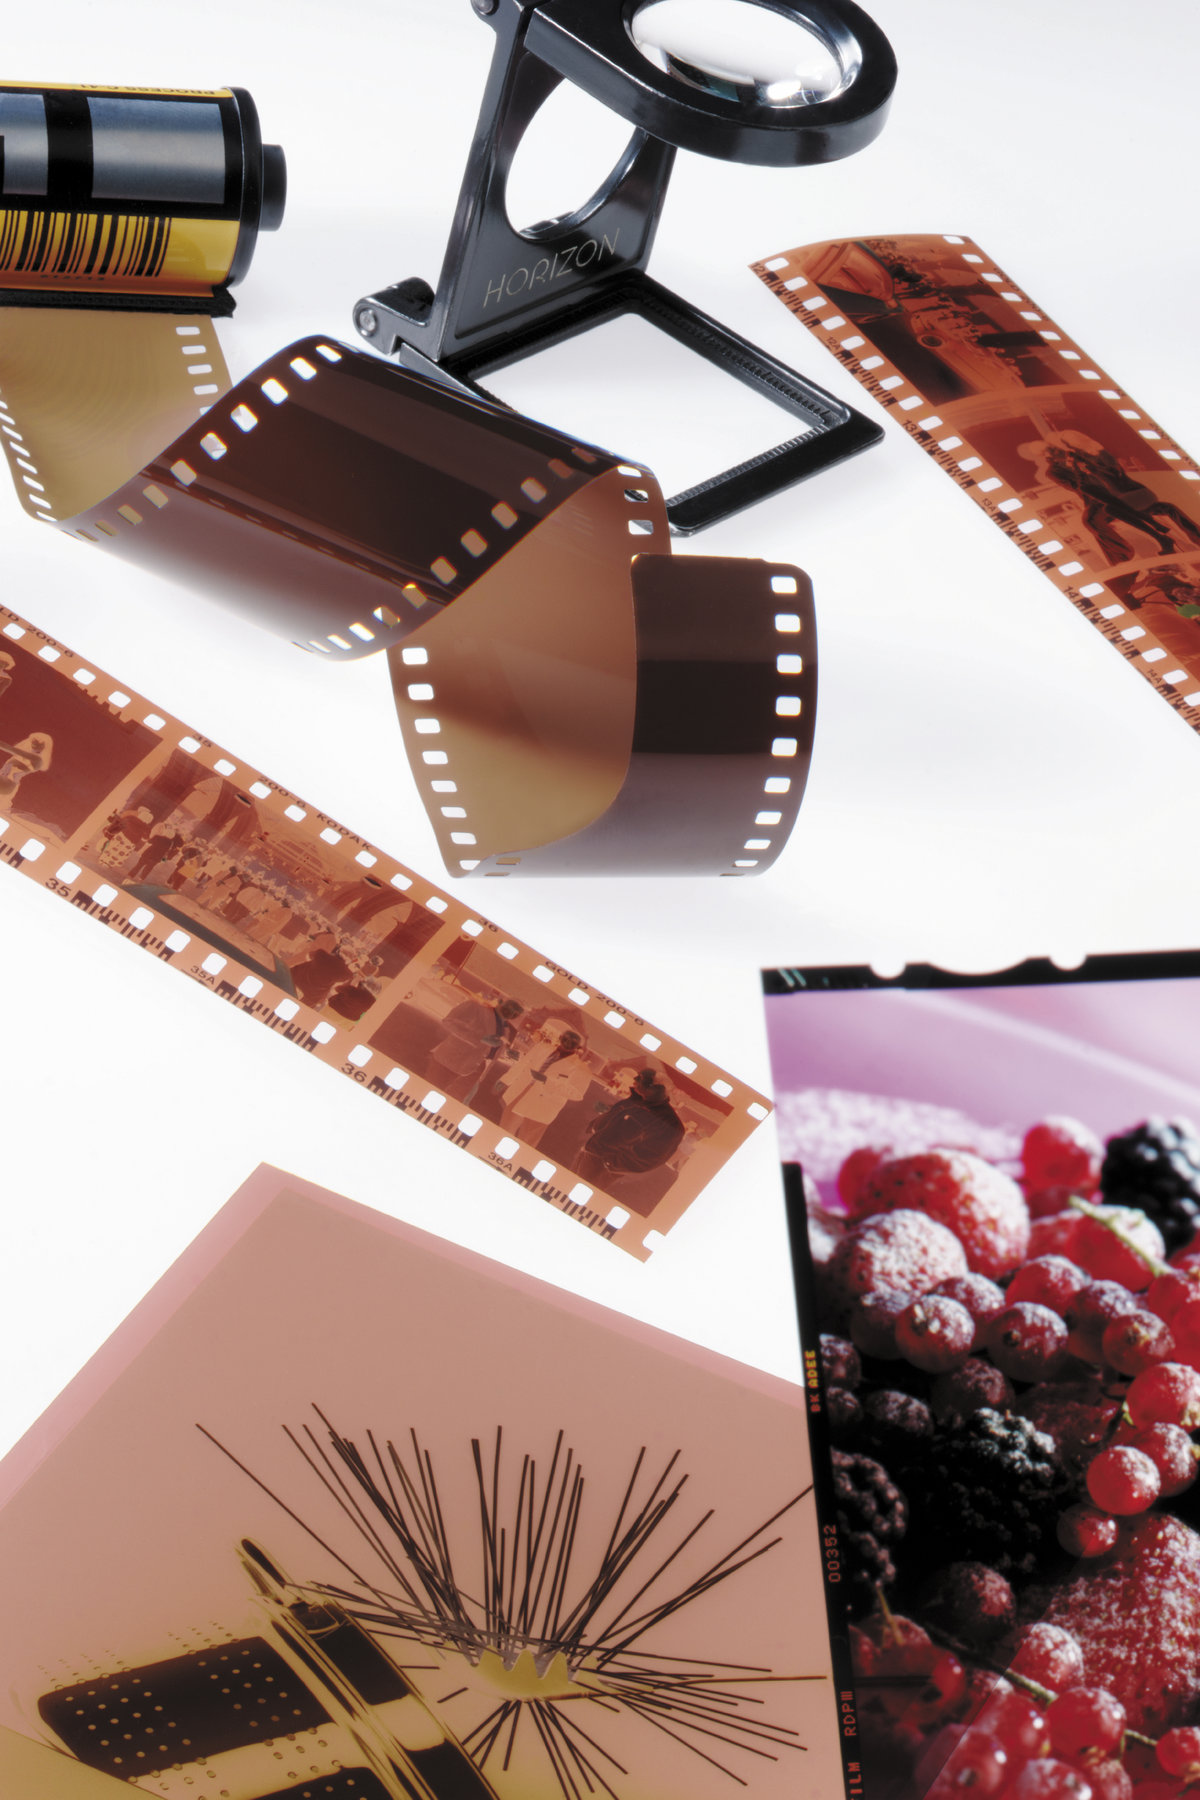 [Translate to Chinese:] film reel and pictures